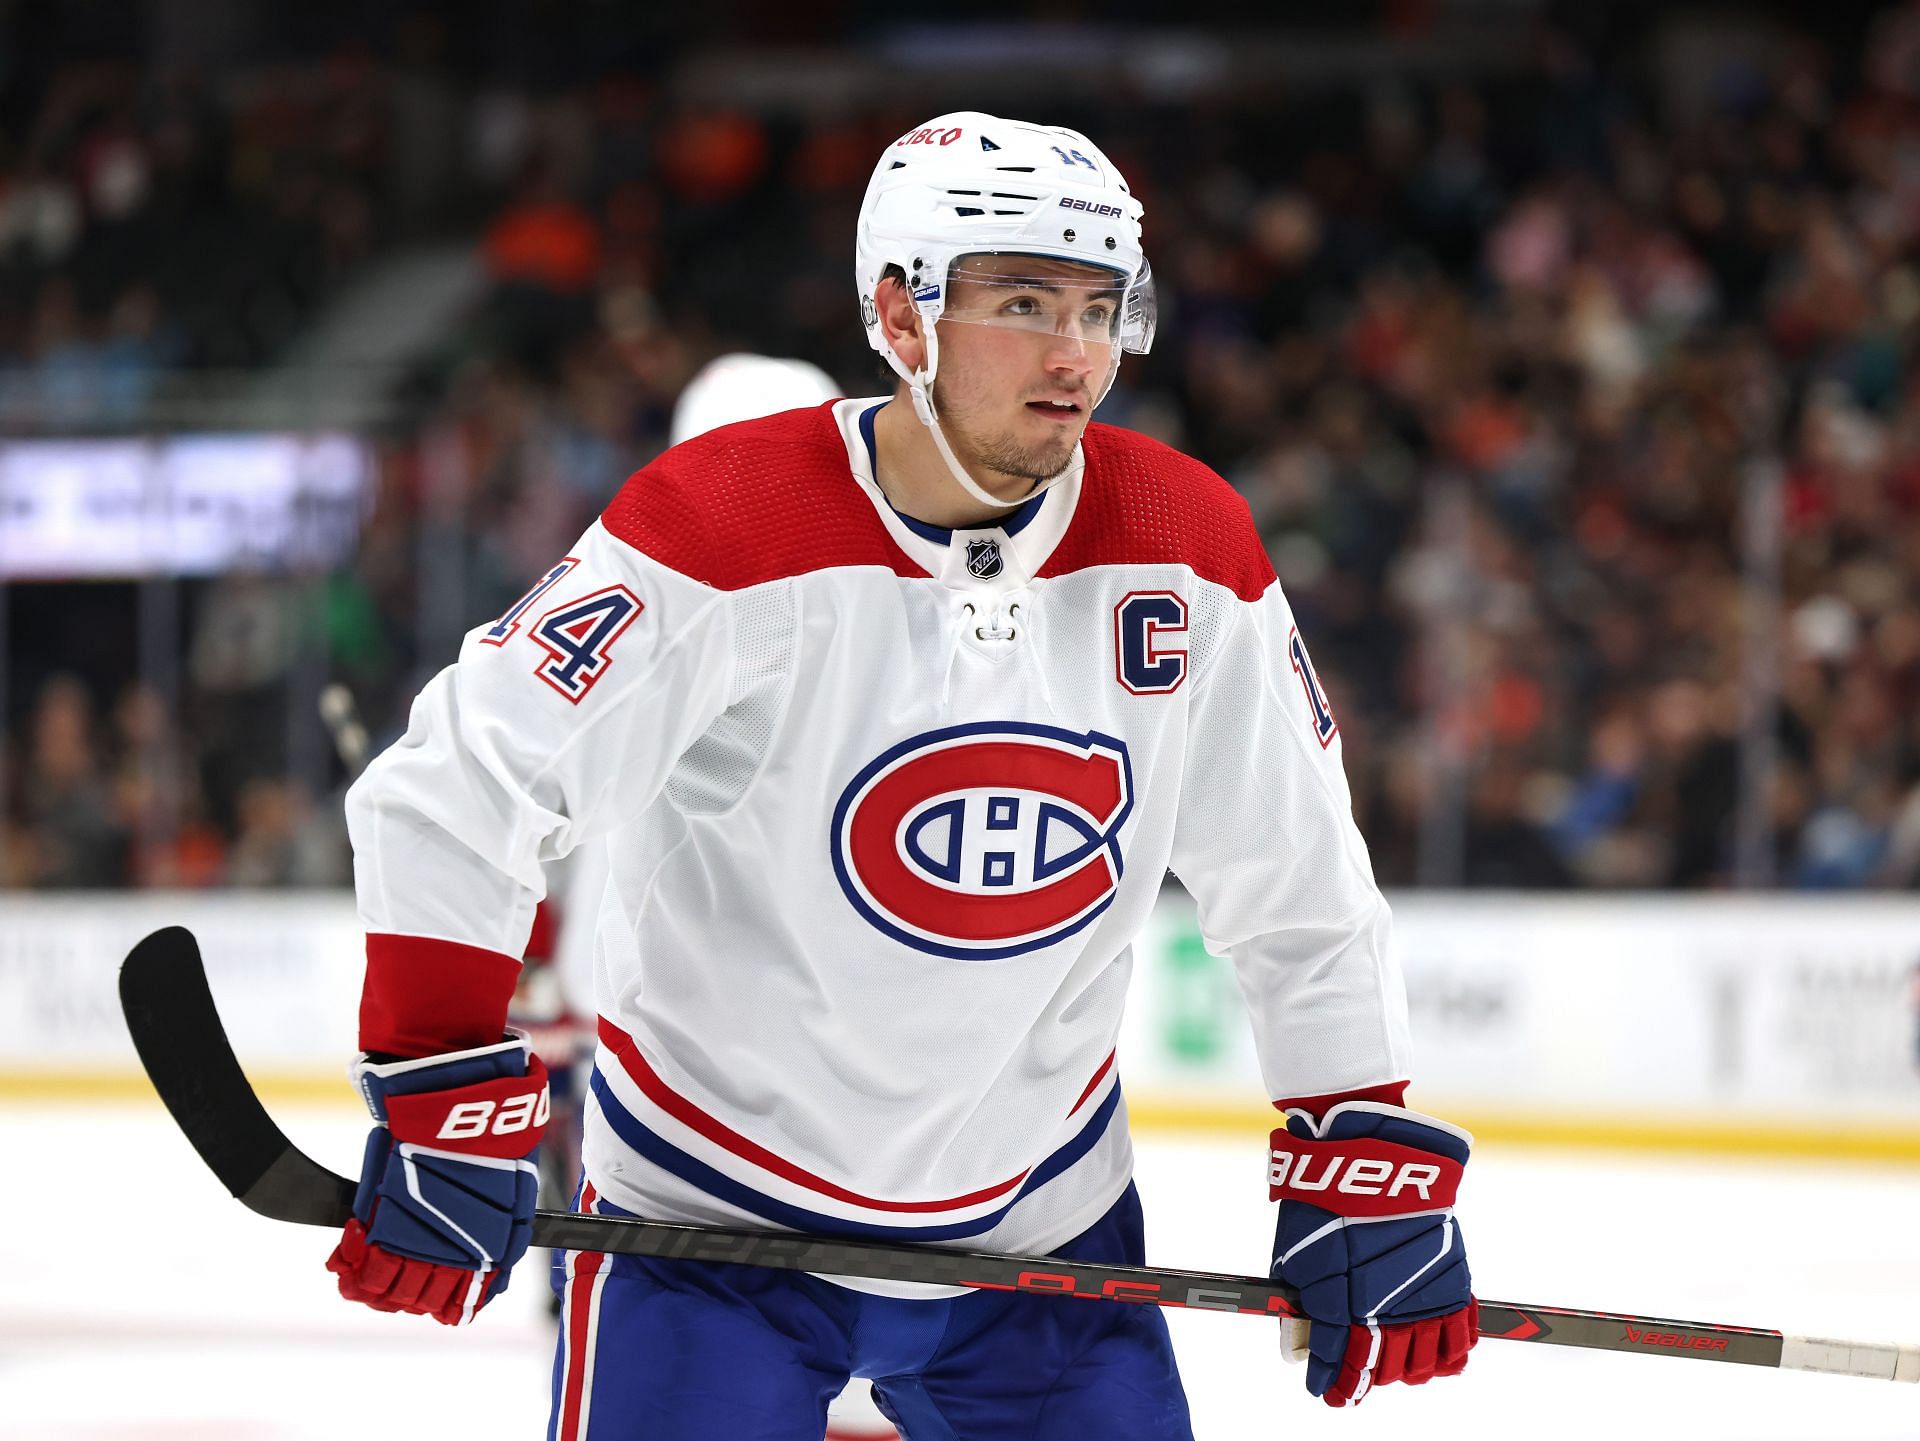 No captain for Habs this season - Montreal